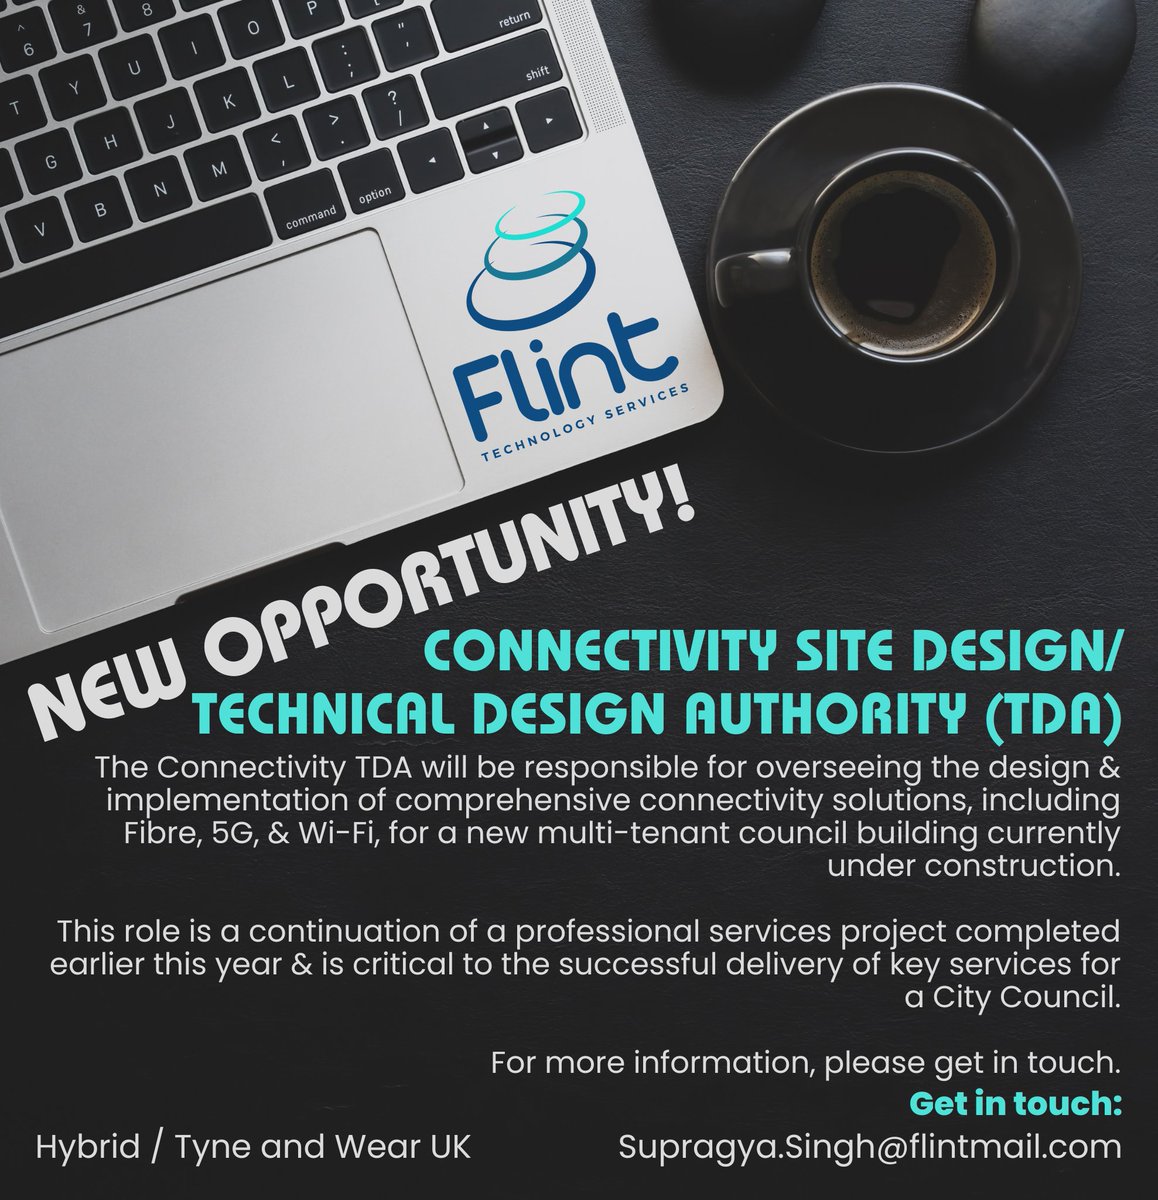 #TeamFTS are seeking a Connectivity Site Design/Technical Design Authority (TDA).

To apply for this role, or for more information, please get in touch.

#TDA #Connectivity #NewOpportunity #JobAlert #TelcoJobs #ContractJobs #HybridJobs